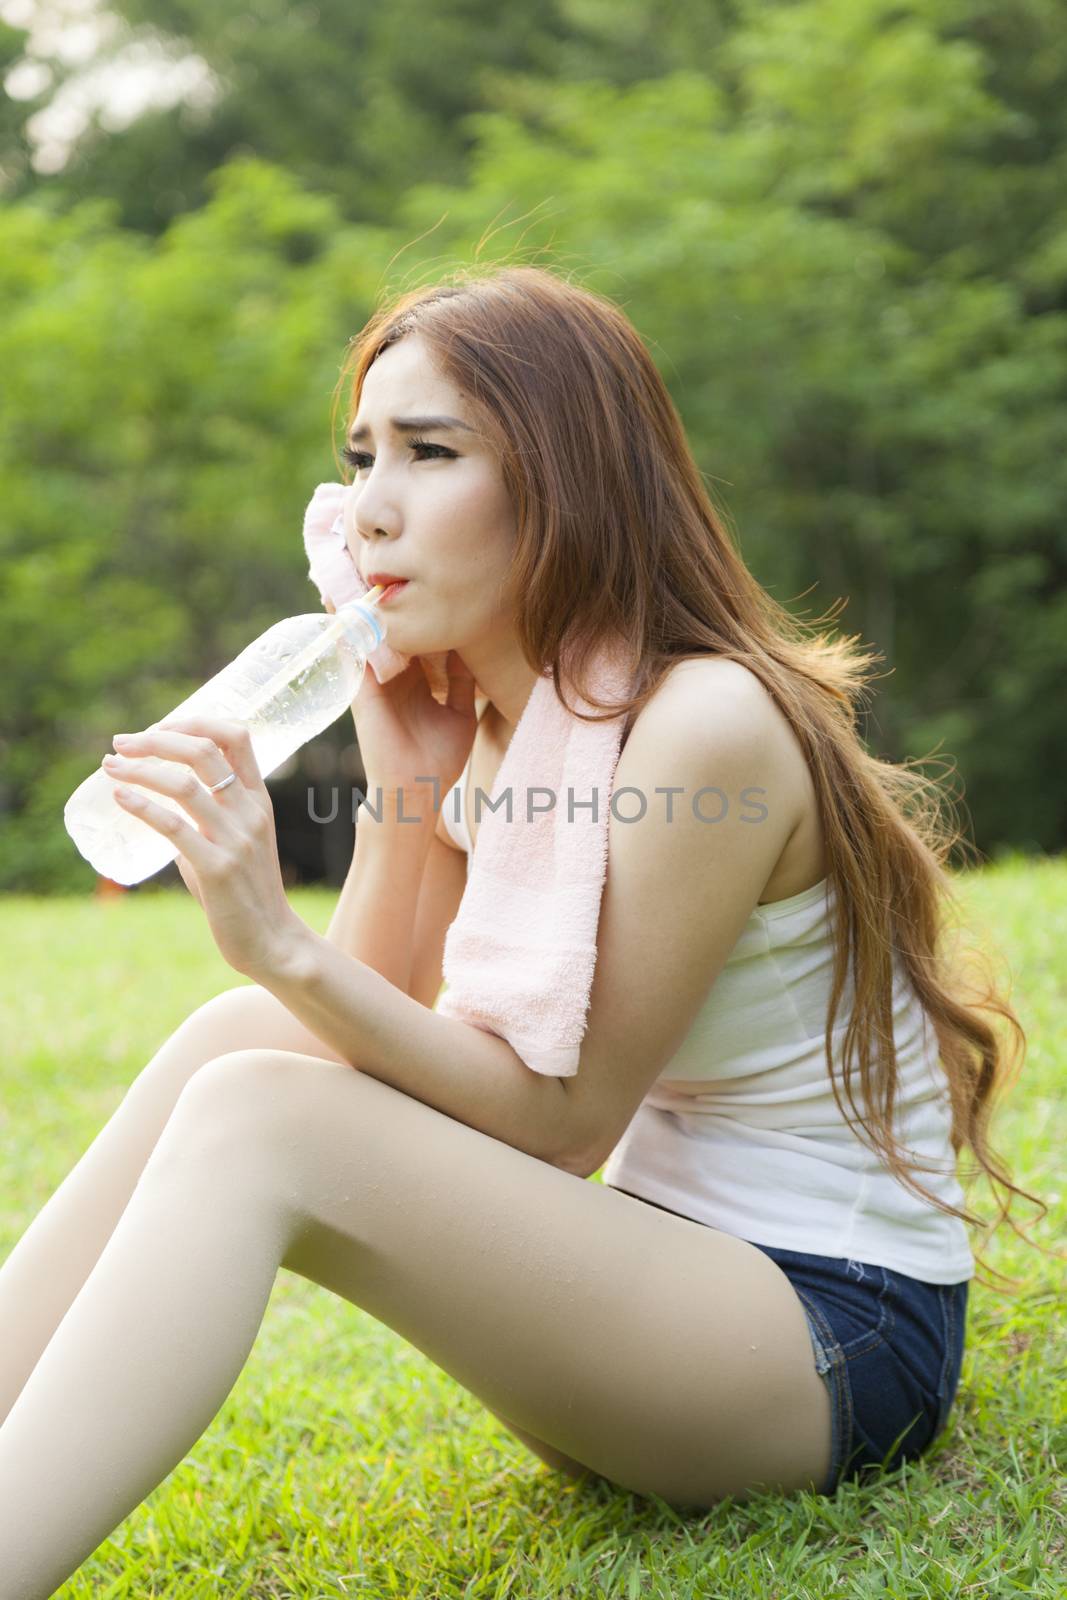 Woman sit and drink after exercise. On the lawn after a workout in the park.